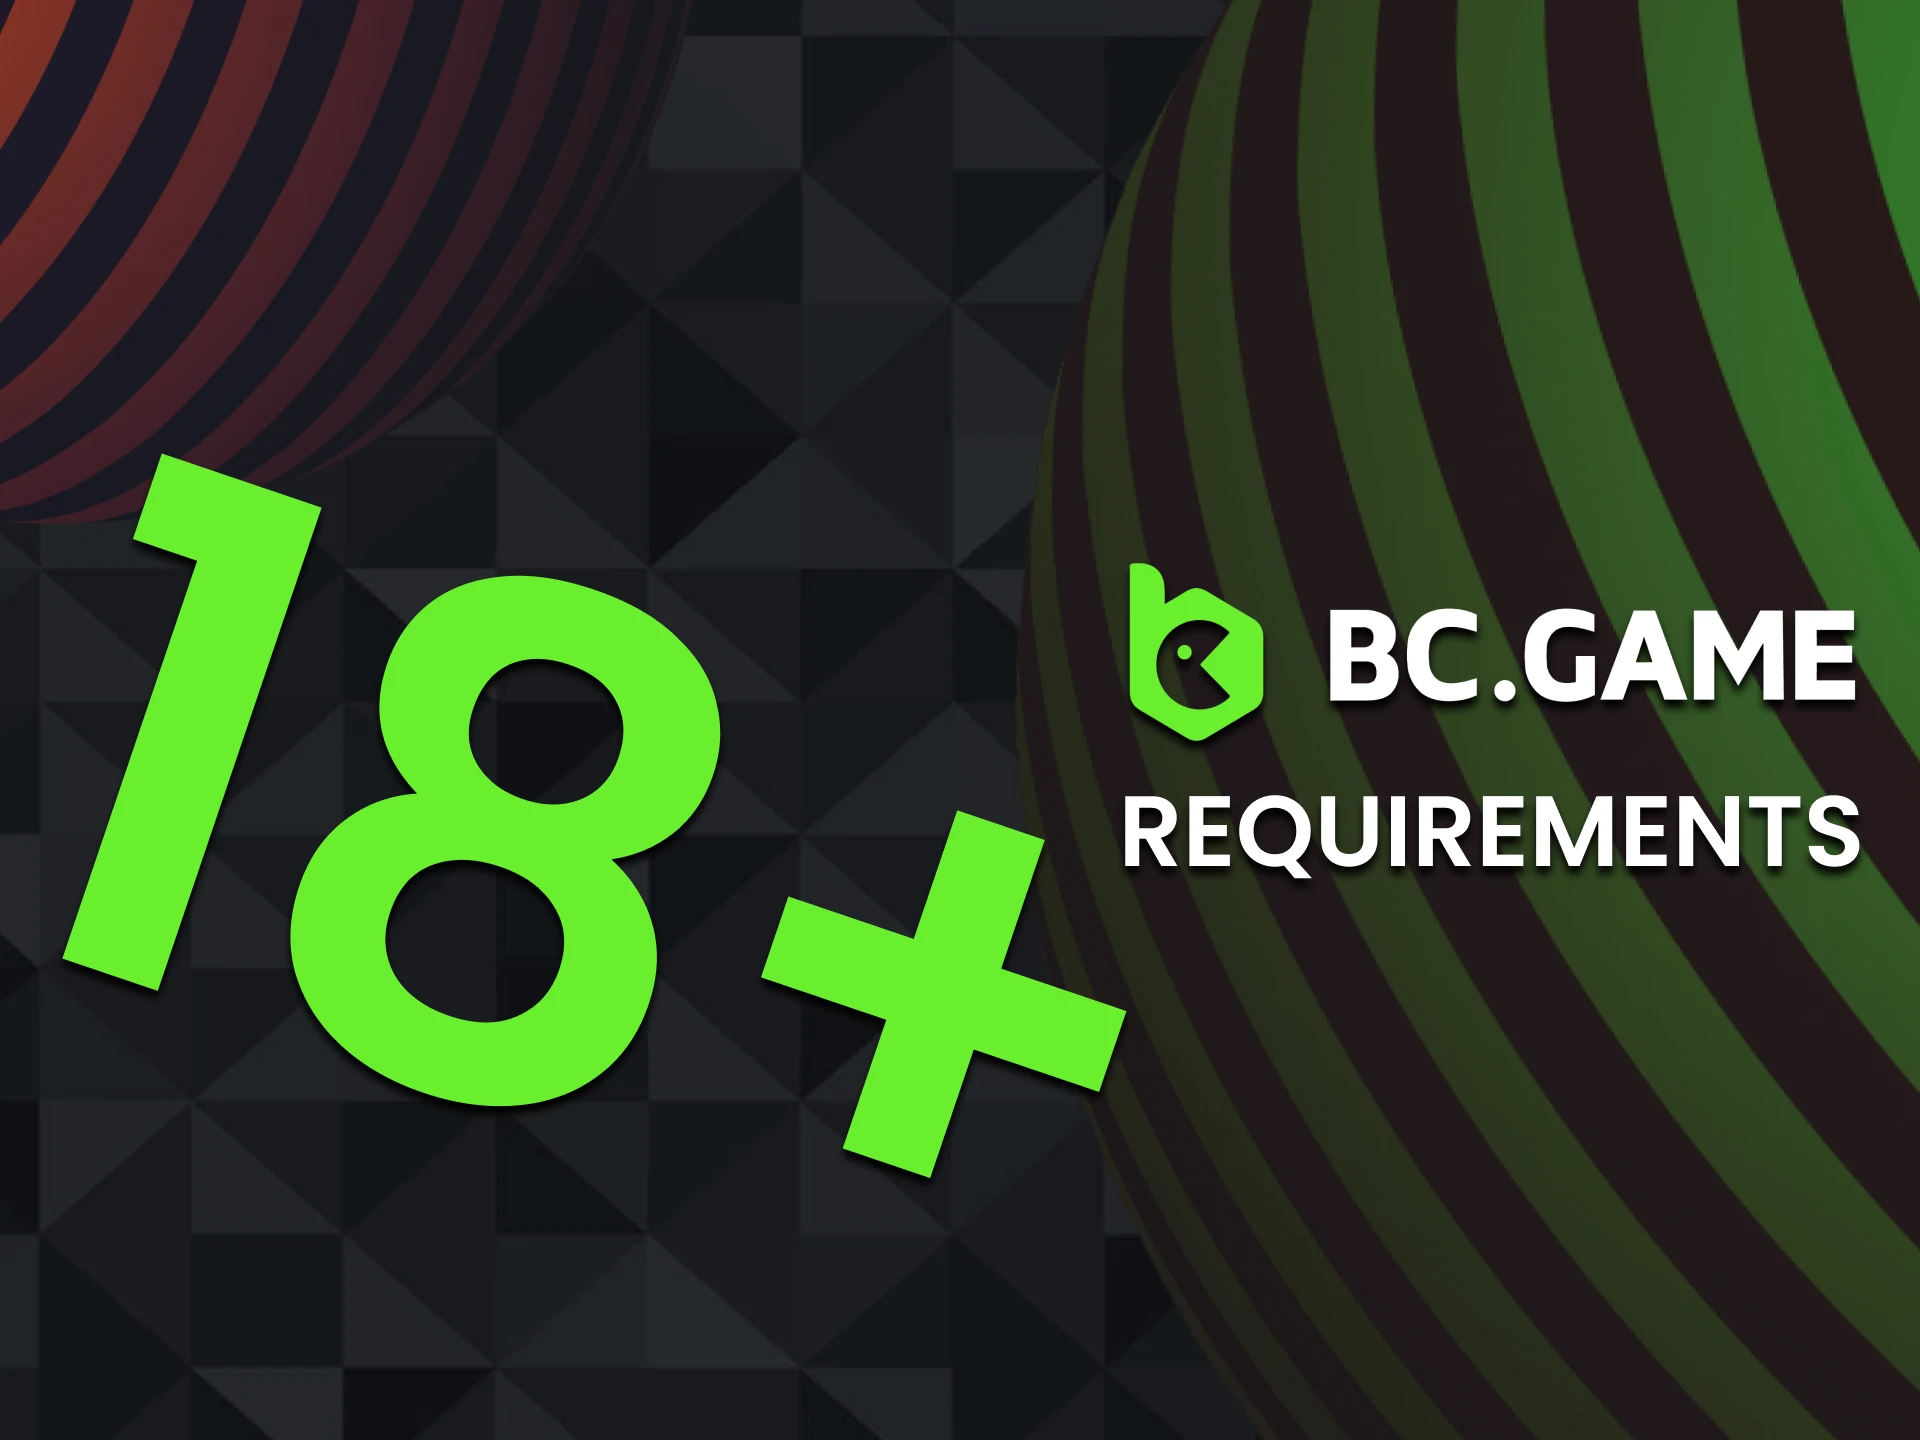 Follow the requirements when creating your account on the BC Game.